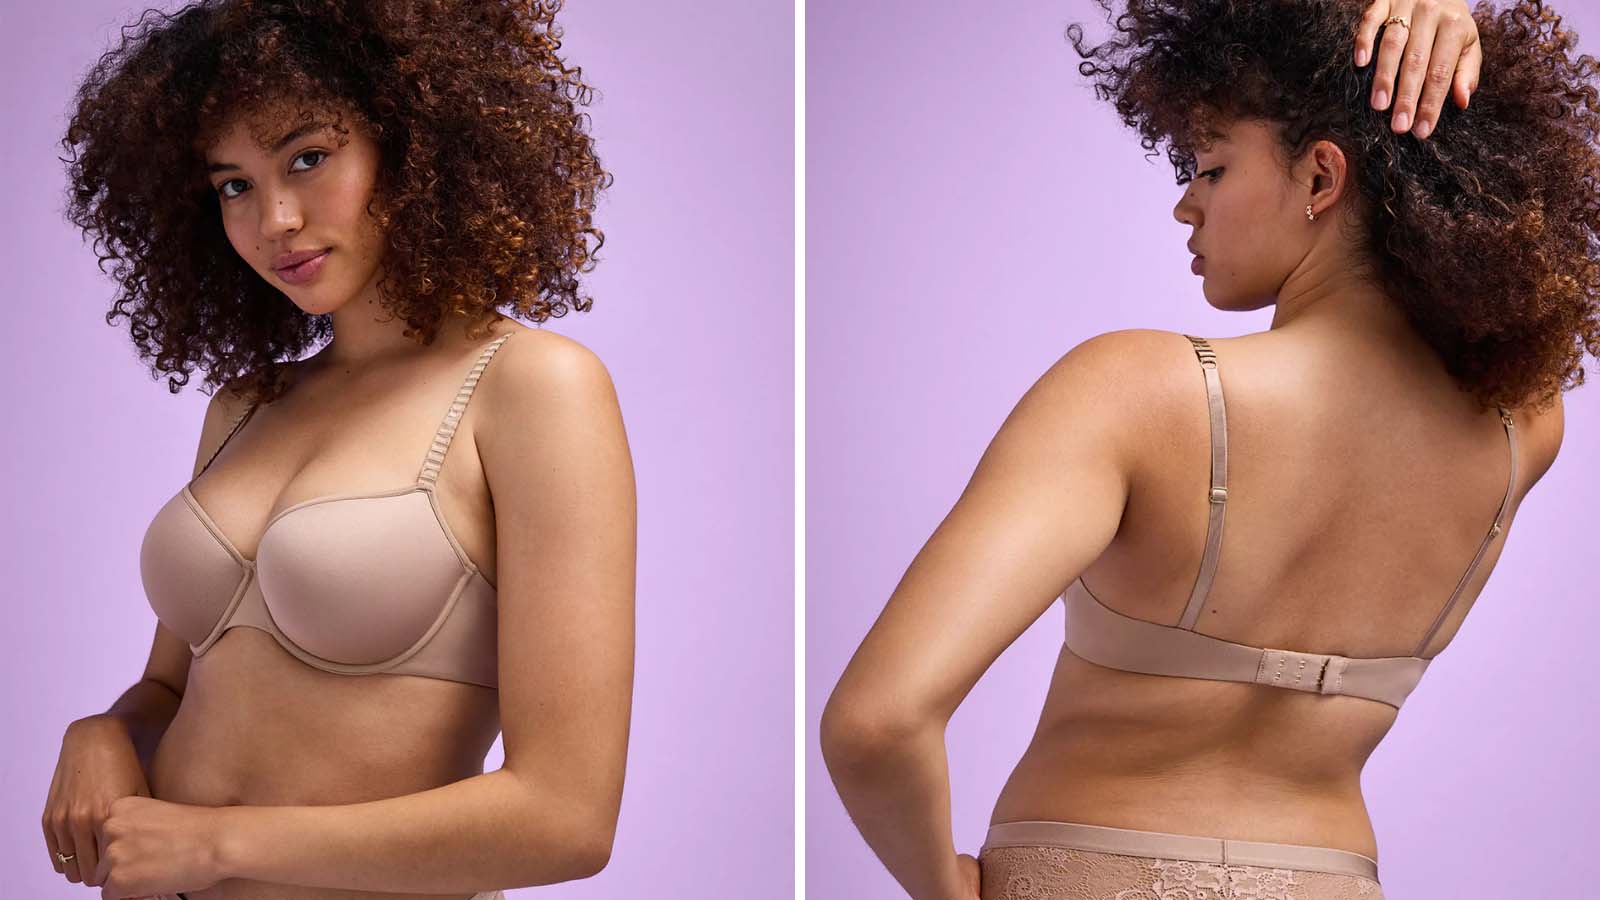 BACK IN STOCK: Form 360 Fit™ Wireless Bra in Taupe! - Third Love